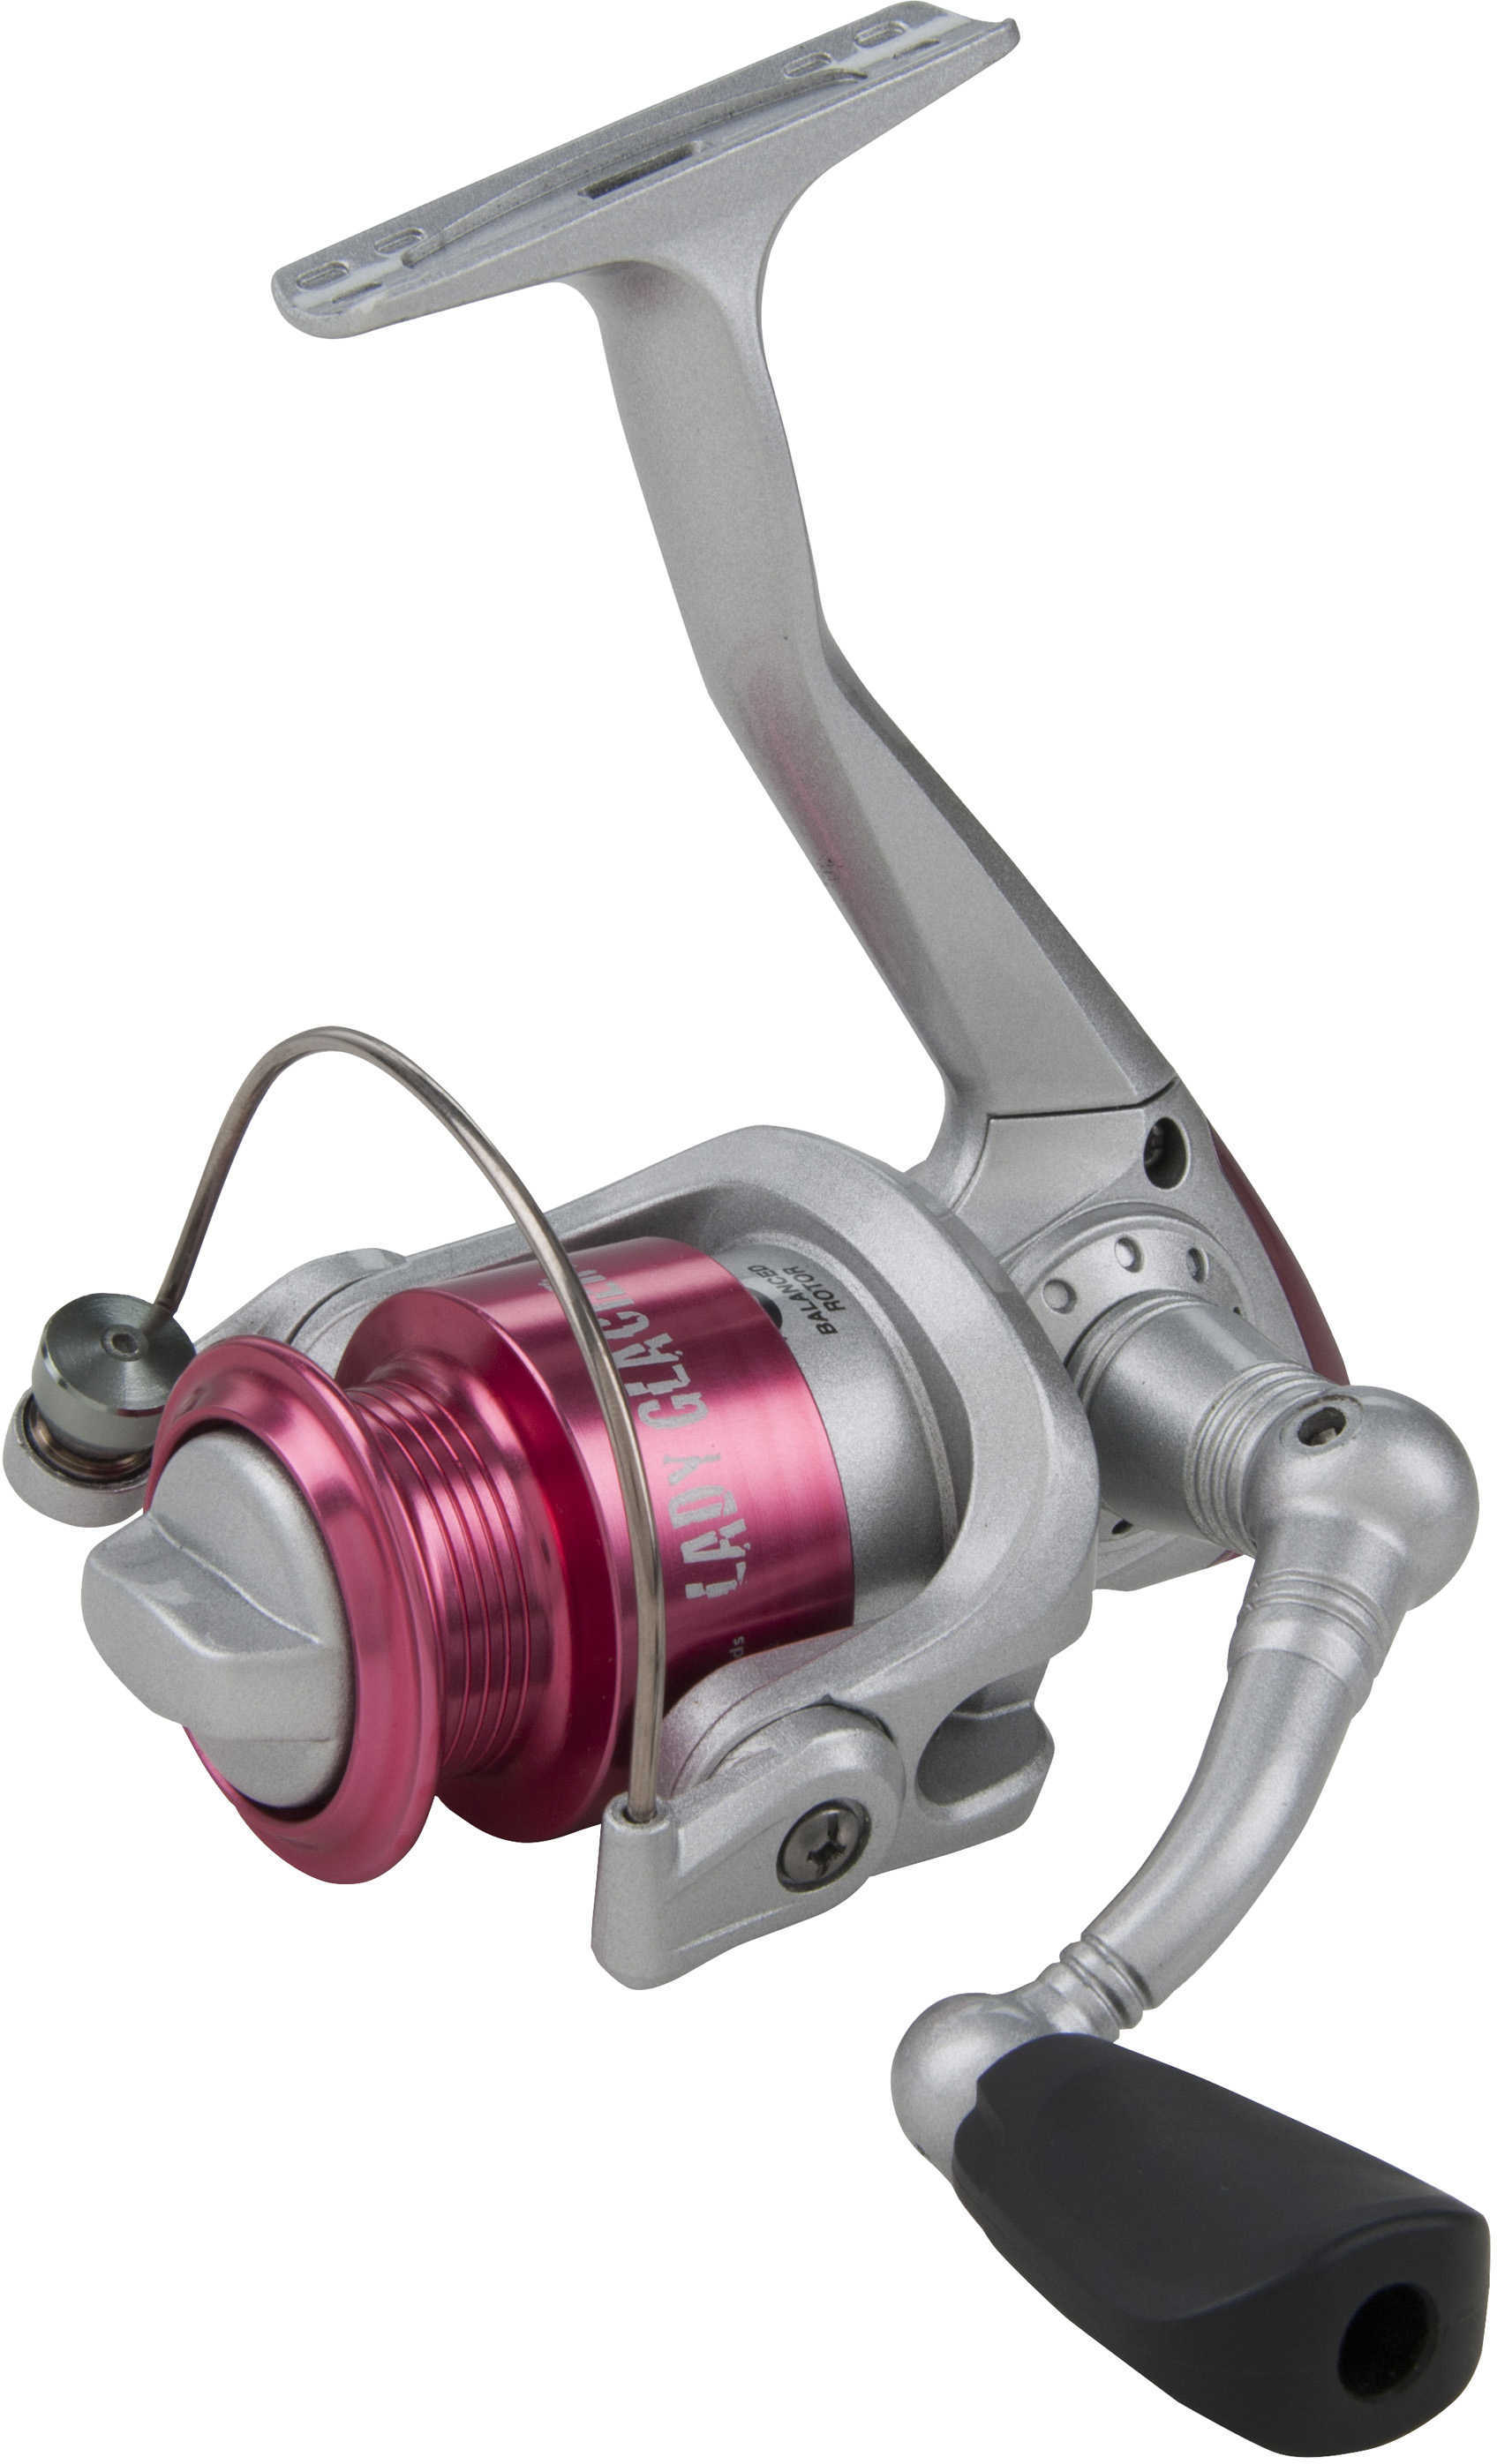 Shakespeare Glacier Ice Reel Pink Md: 1323312